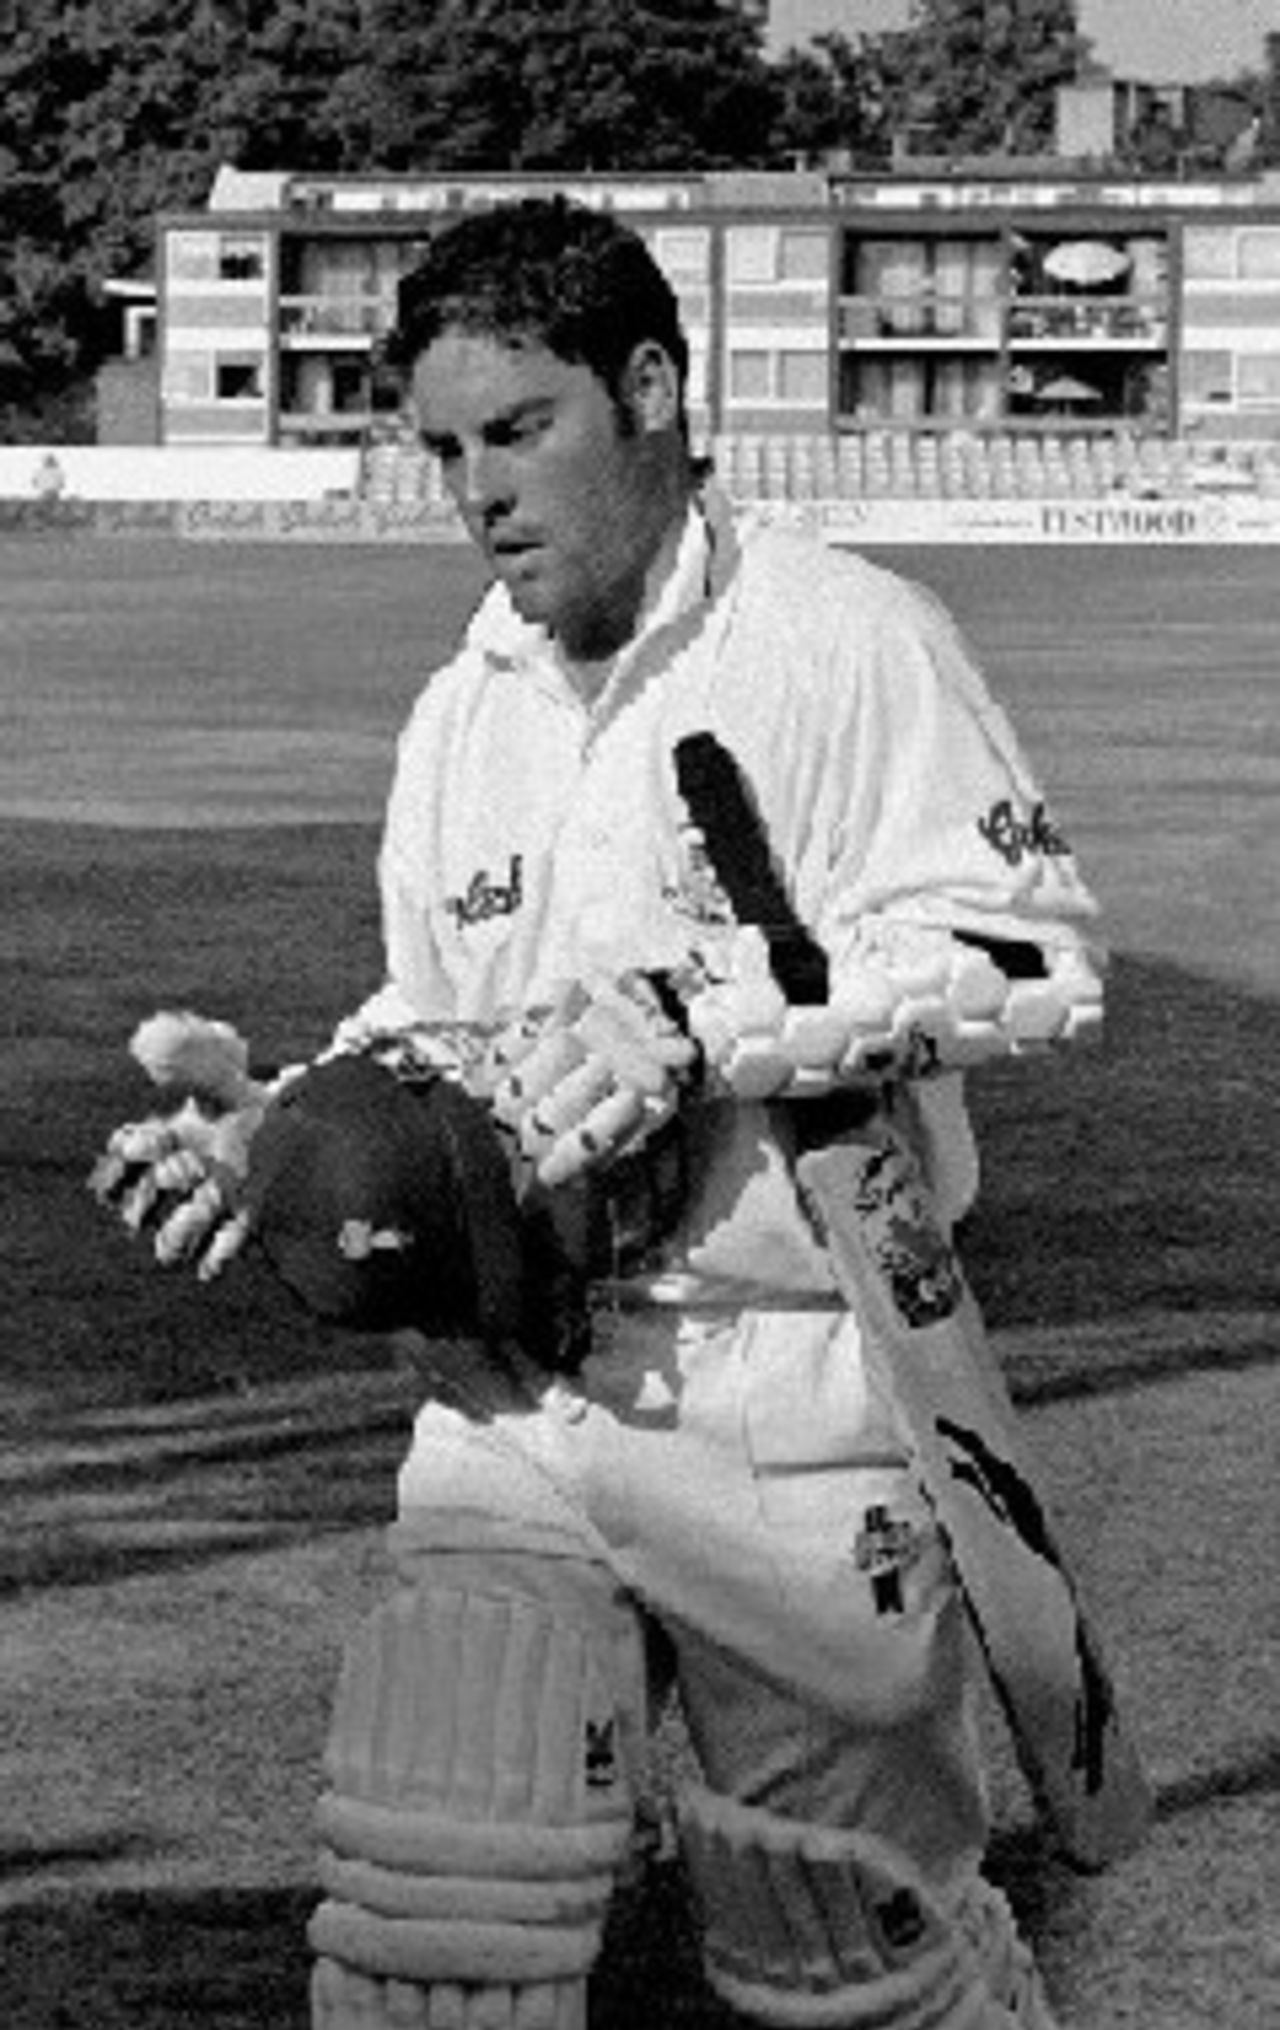 Mark Garaway's last innings for Hampshire, saving the game against New Zealand .